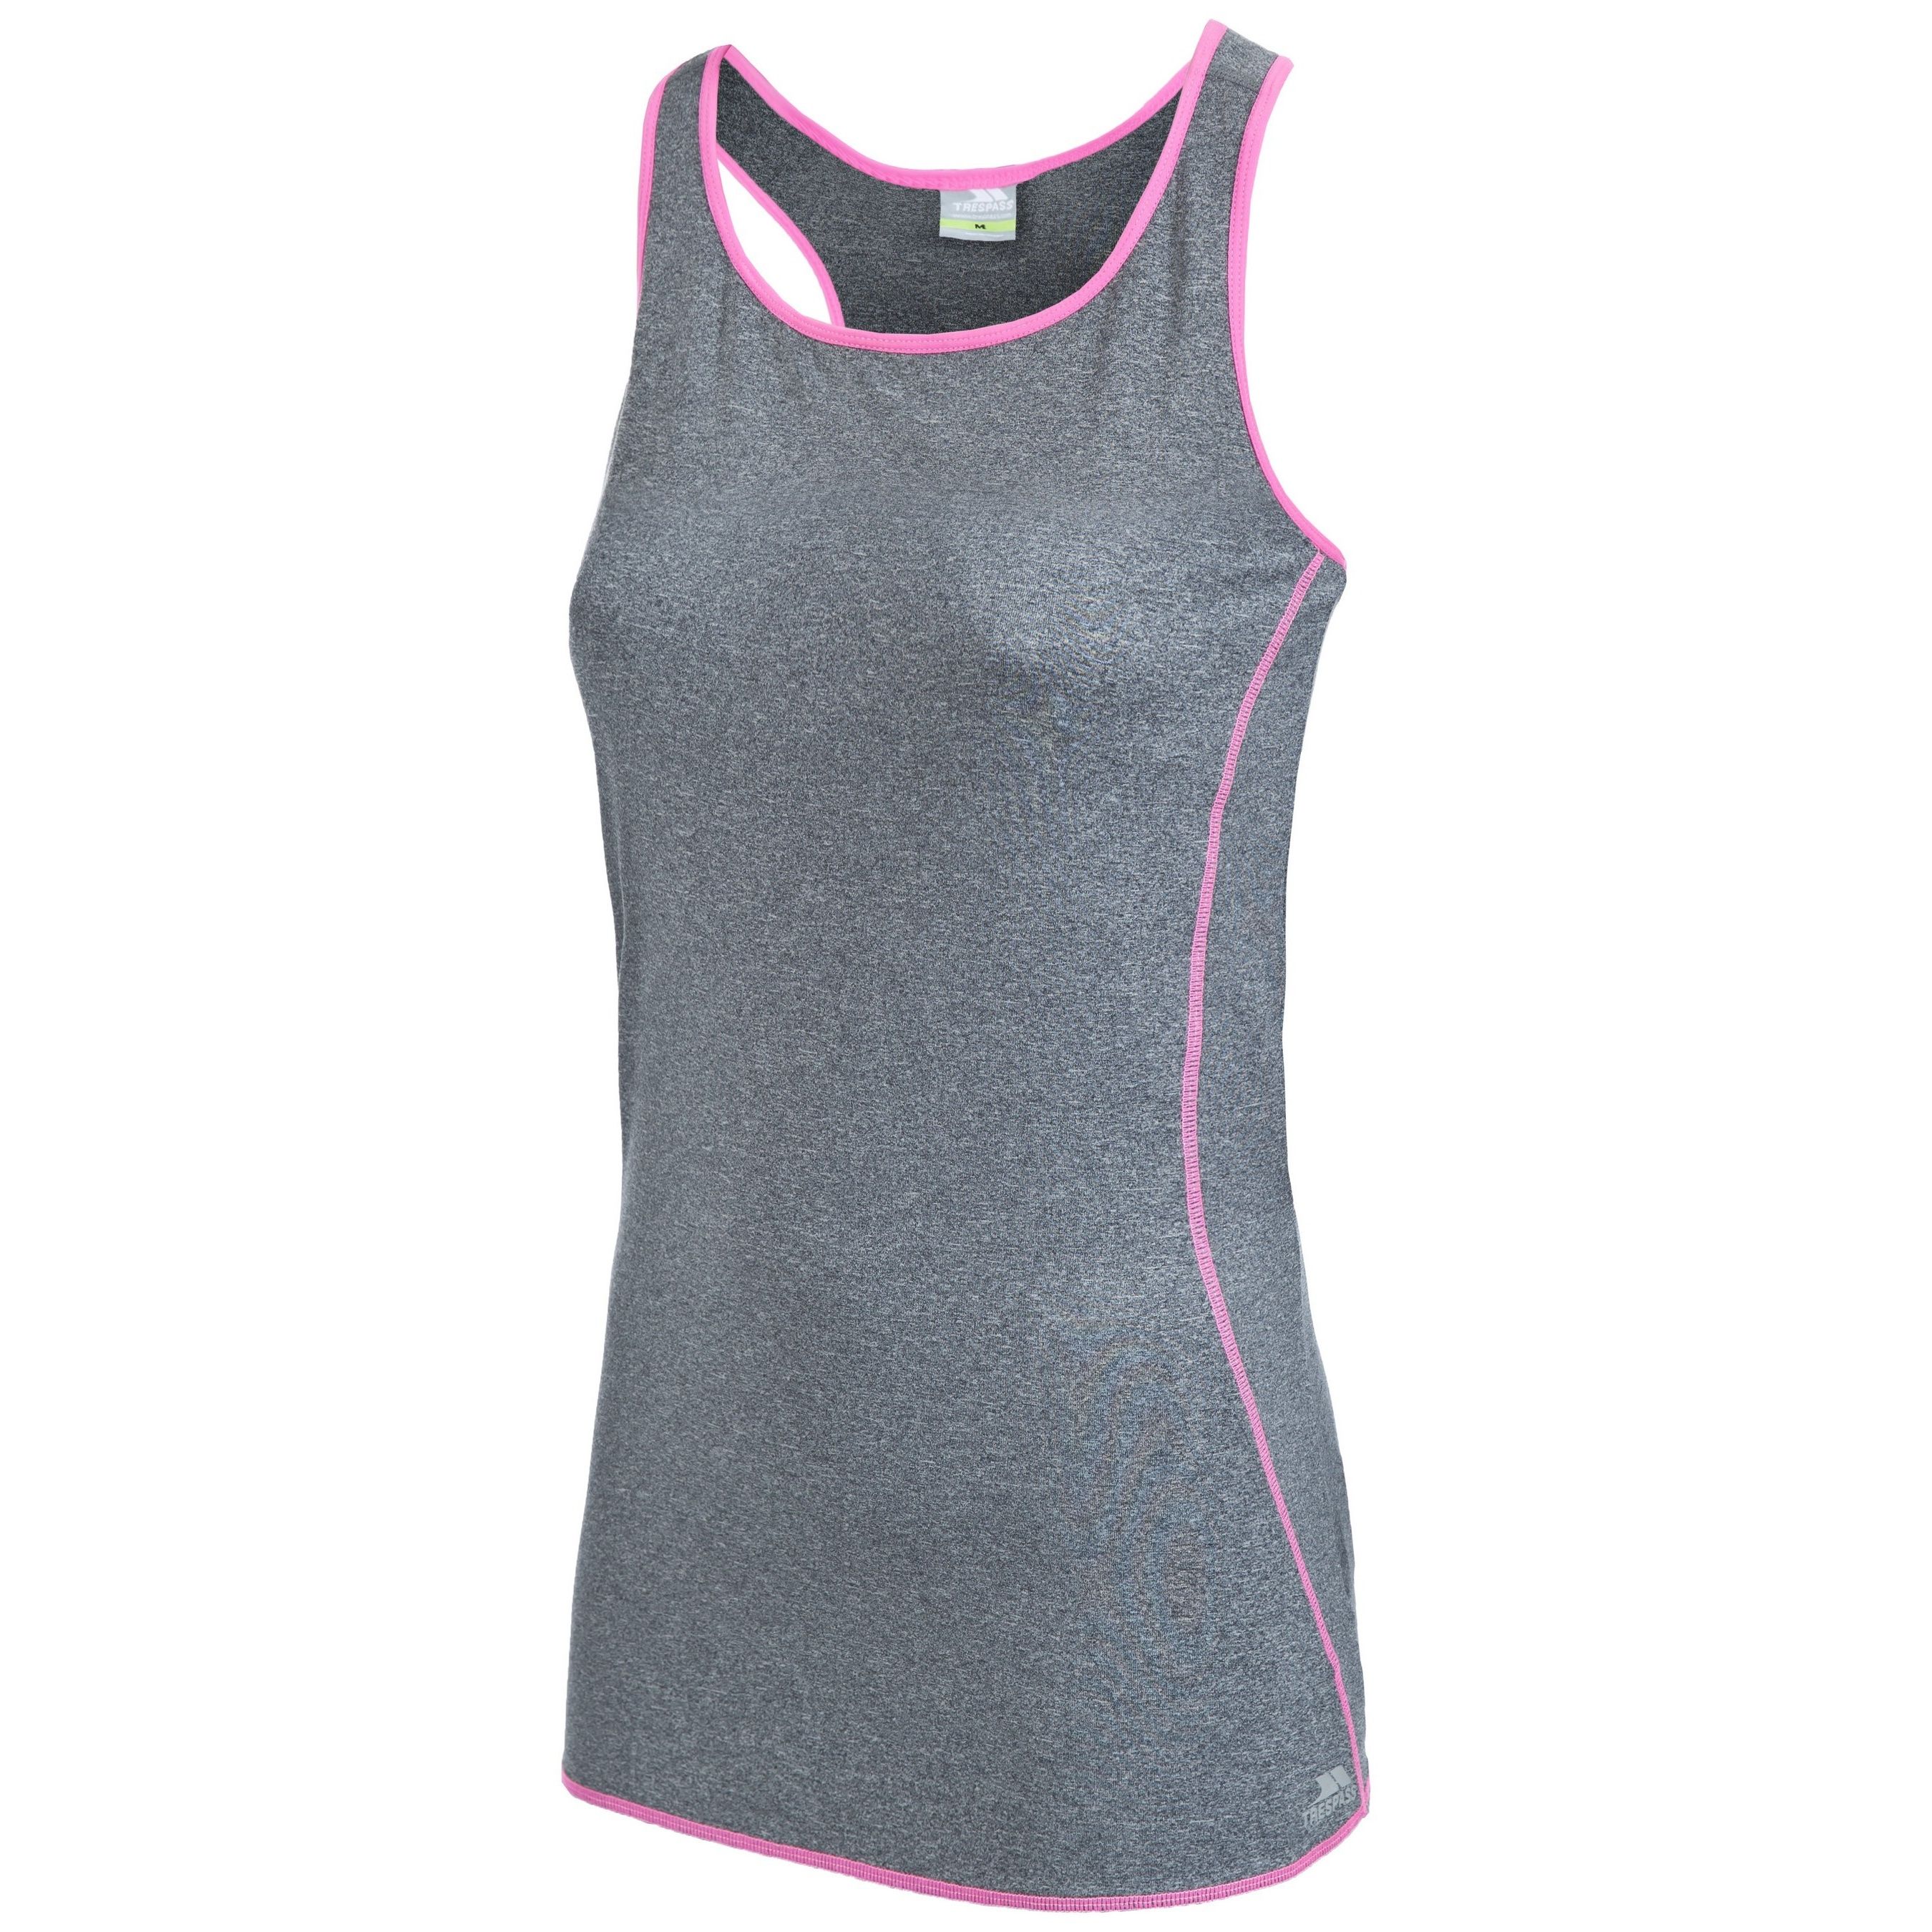 Flat locked seams. Supportive fabric. Contrast trims. Reflective printed logos. Hidden bra support. Wicking. Quick dry. 88% Polyester, 12% Elastane. Trespass Womens Chest Sizing (approx): XS/8 - 32in/81cm, S/10 - 34in/86cm, M/12 - 36in/91.4cm, L/14 - 38in/96.5cm, XL/16 - 40in/101.5cm, XXL/18 - 42in/106.5cm.